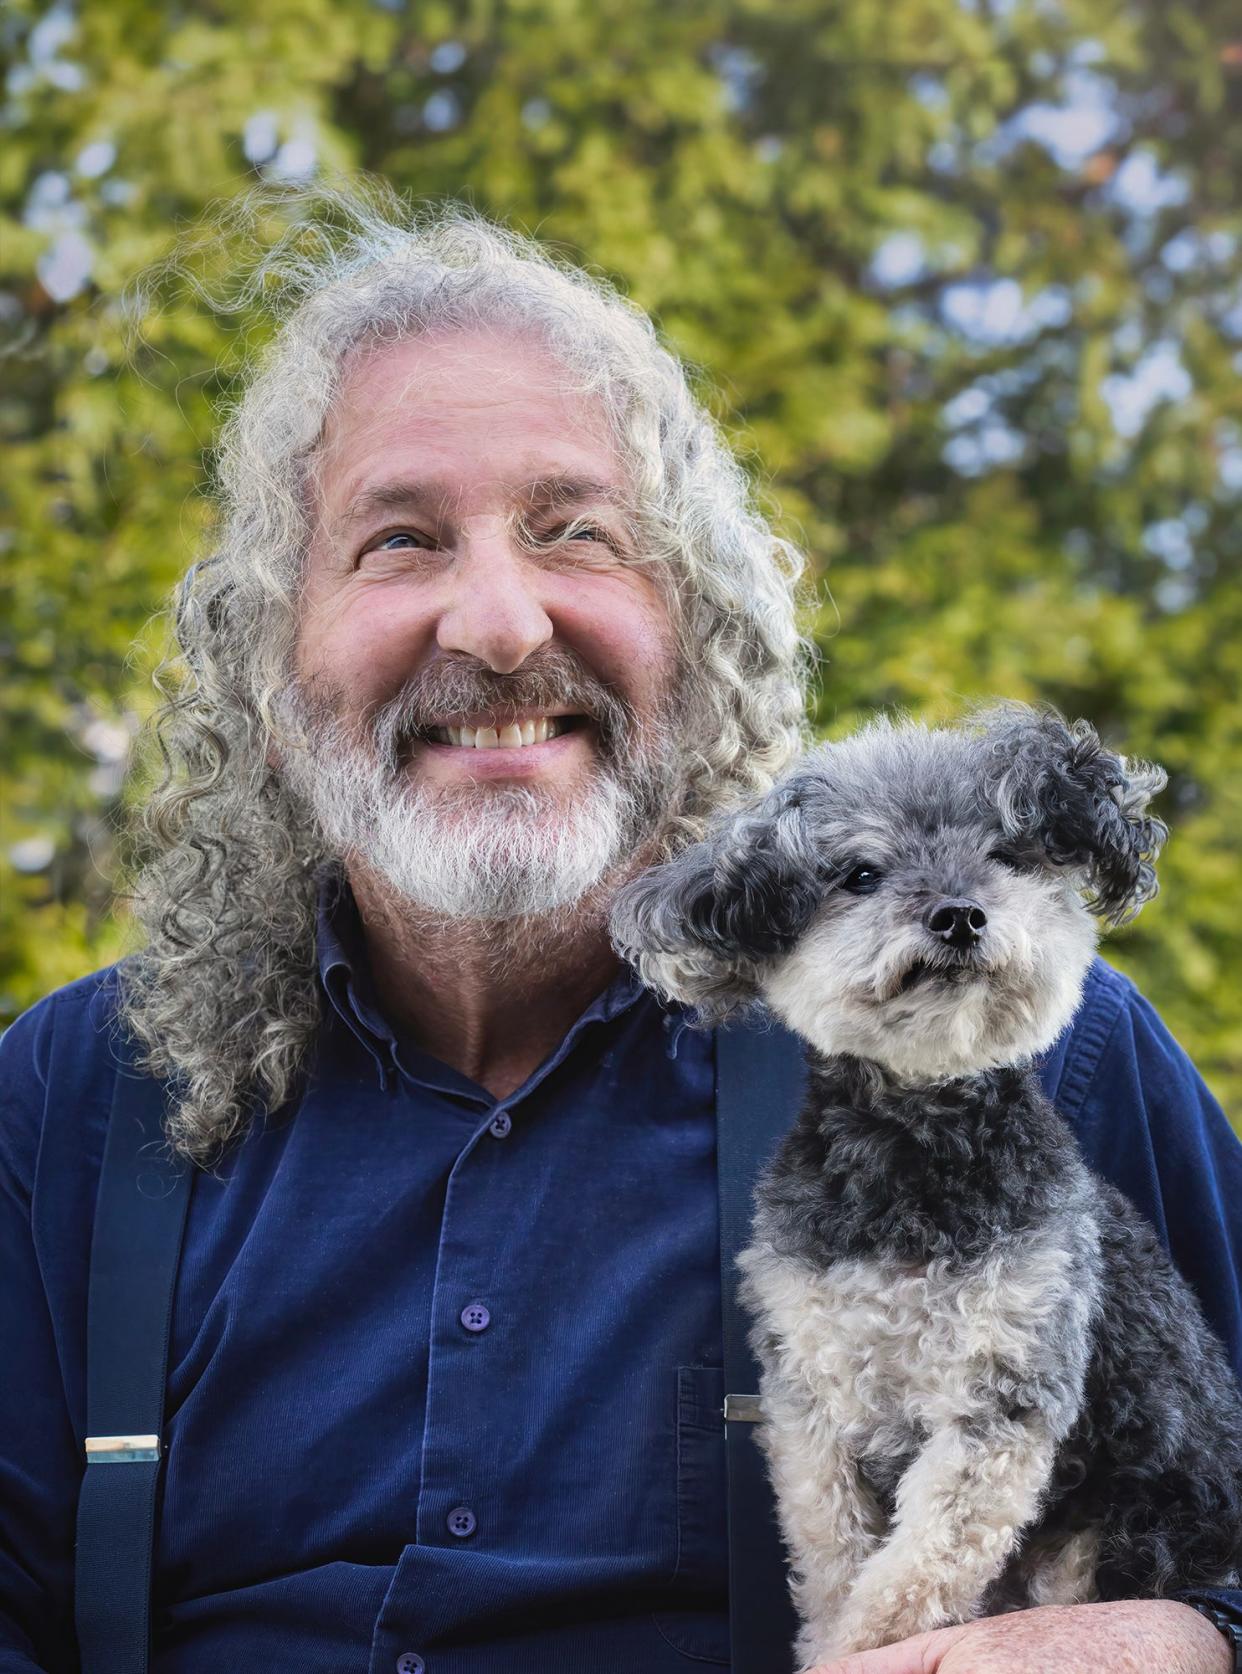 A dog poses with its owner. Both appear to have beards.